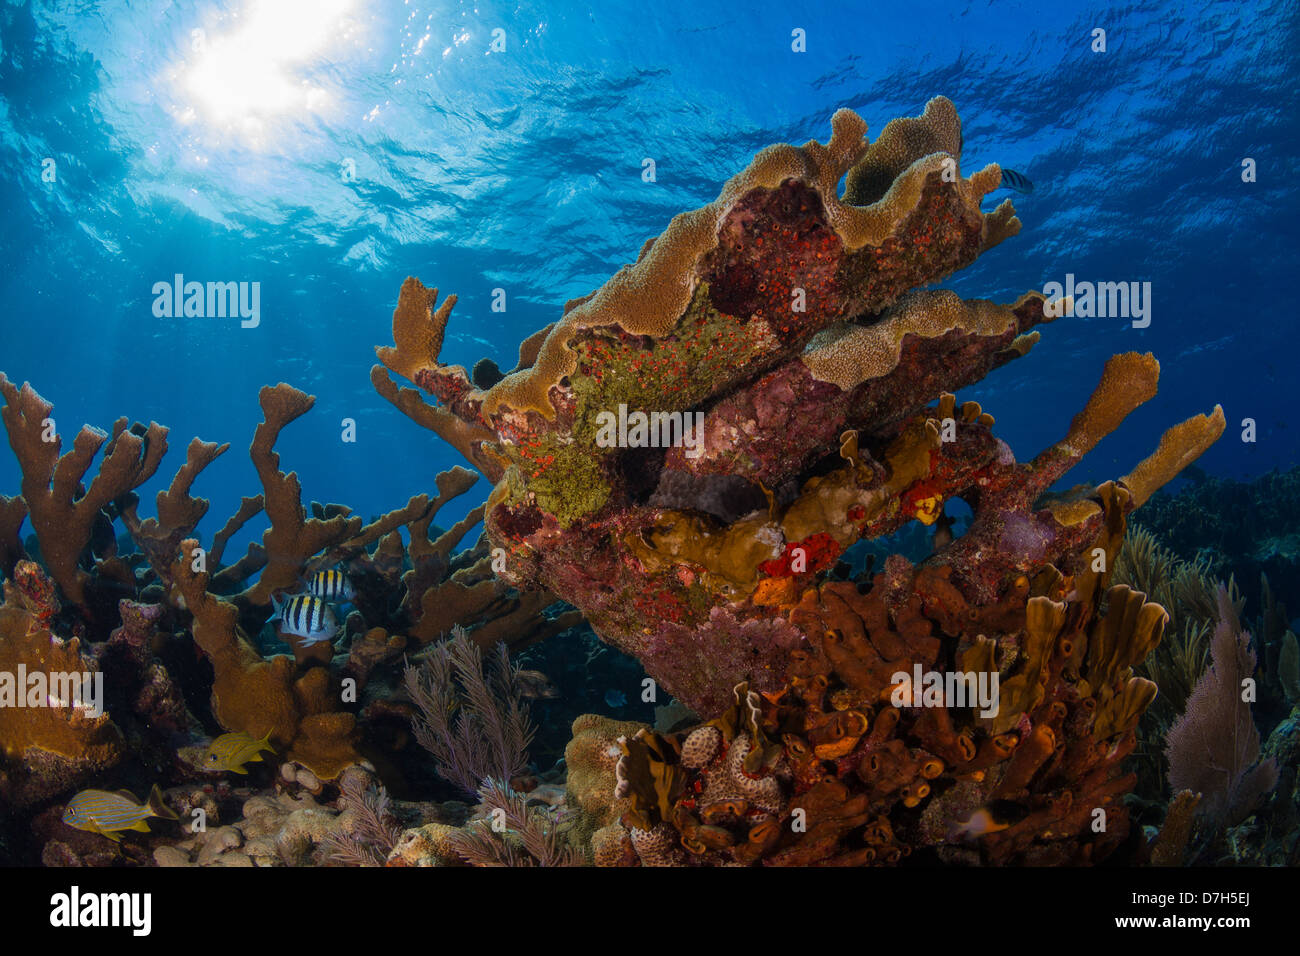 Tropical reef scene of elkhorn coral in Key Largo, Florida. Stock Photo